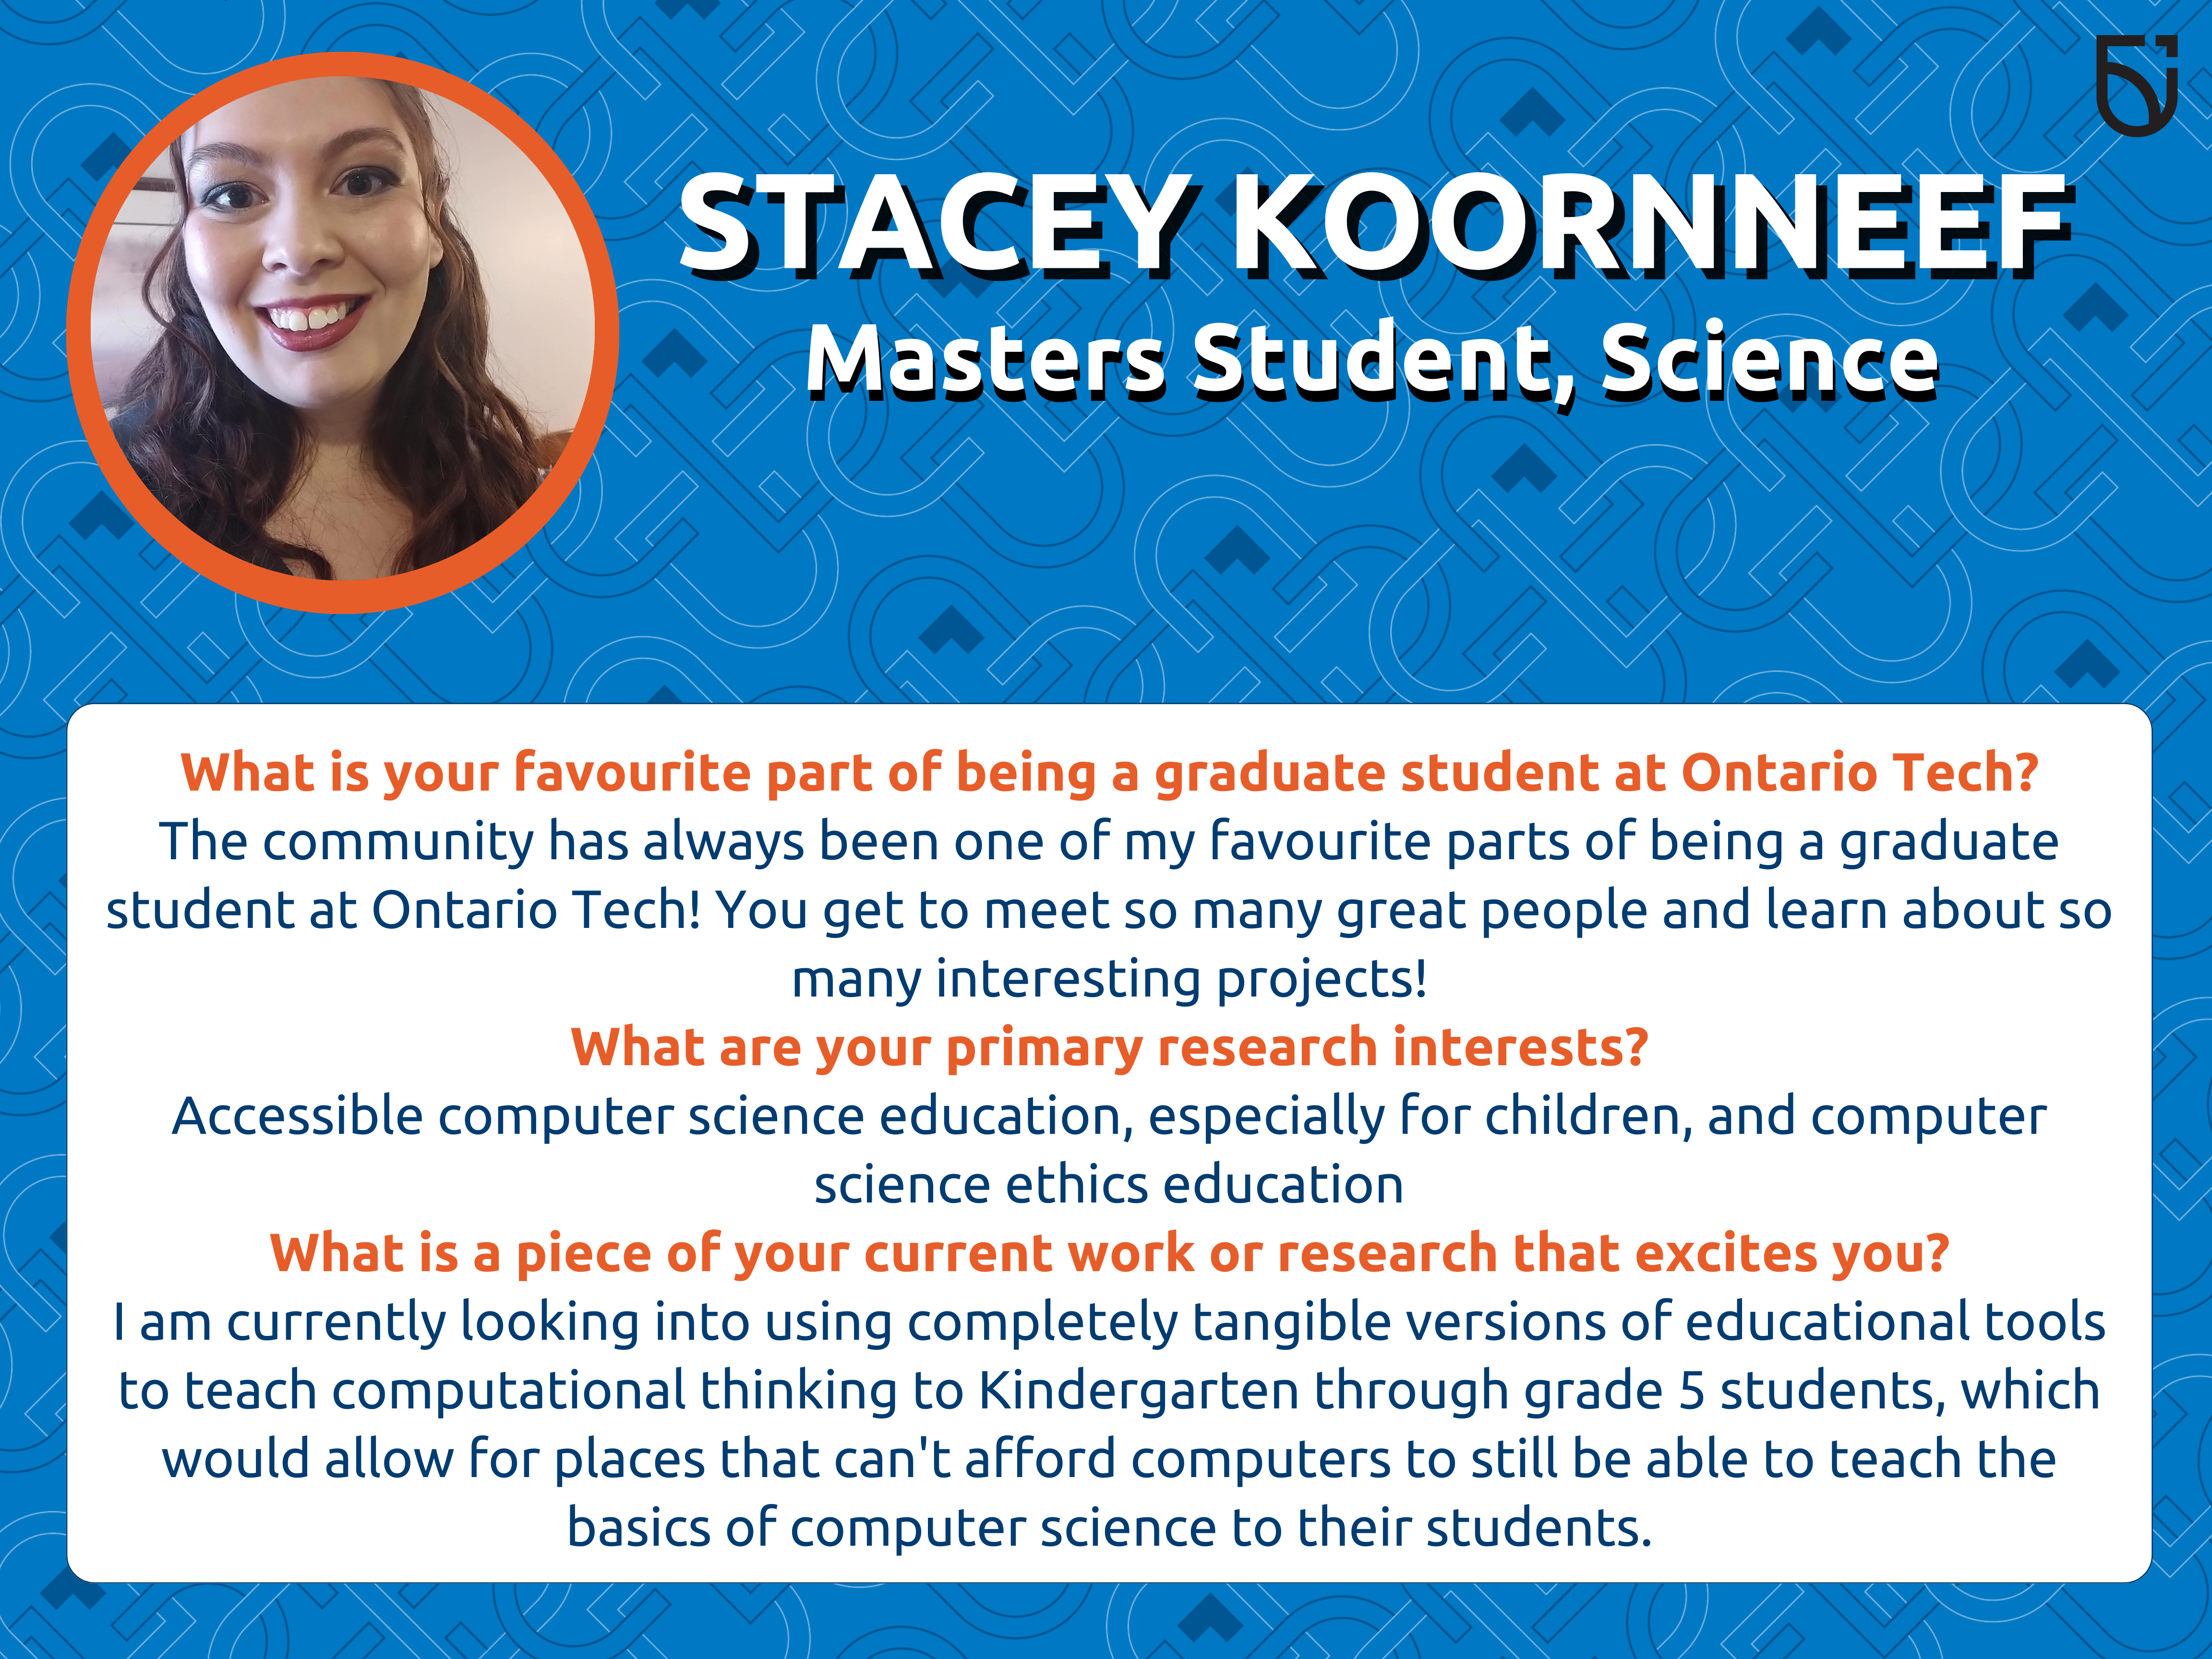 This photo is a Women’s Wednesday feature of Stacey Koornneef, a Master’s Student in the Faculty of Science